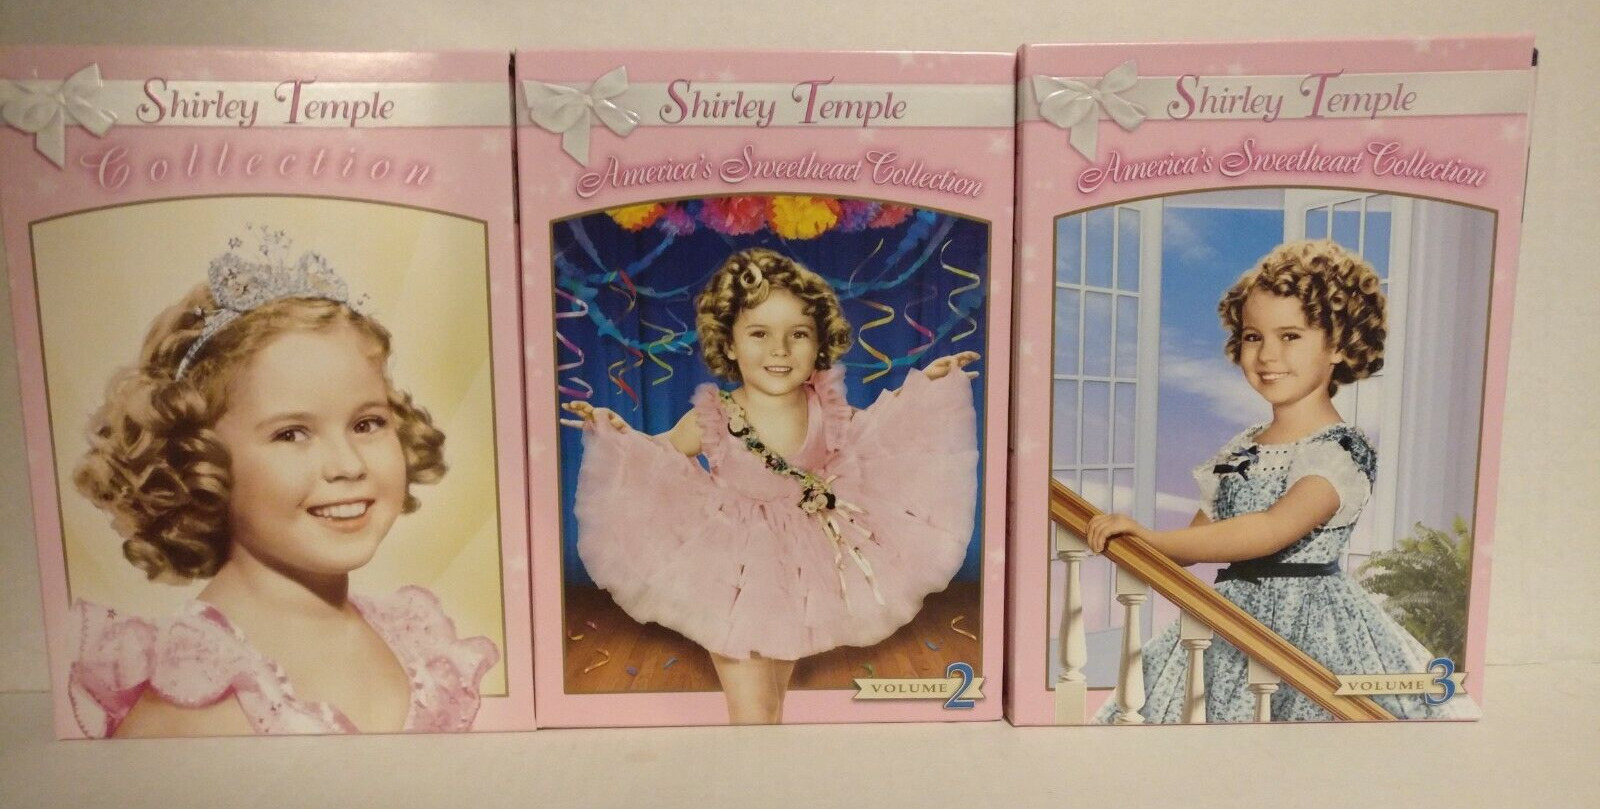 Shirley Temple America’s Sweetheart Collection Volume 1,2&3 (3 Sets=9 DVD's)